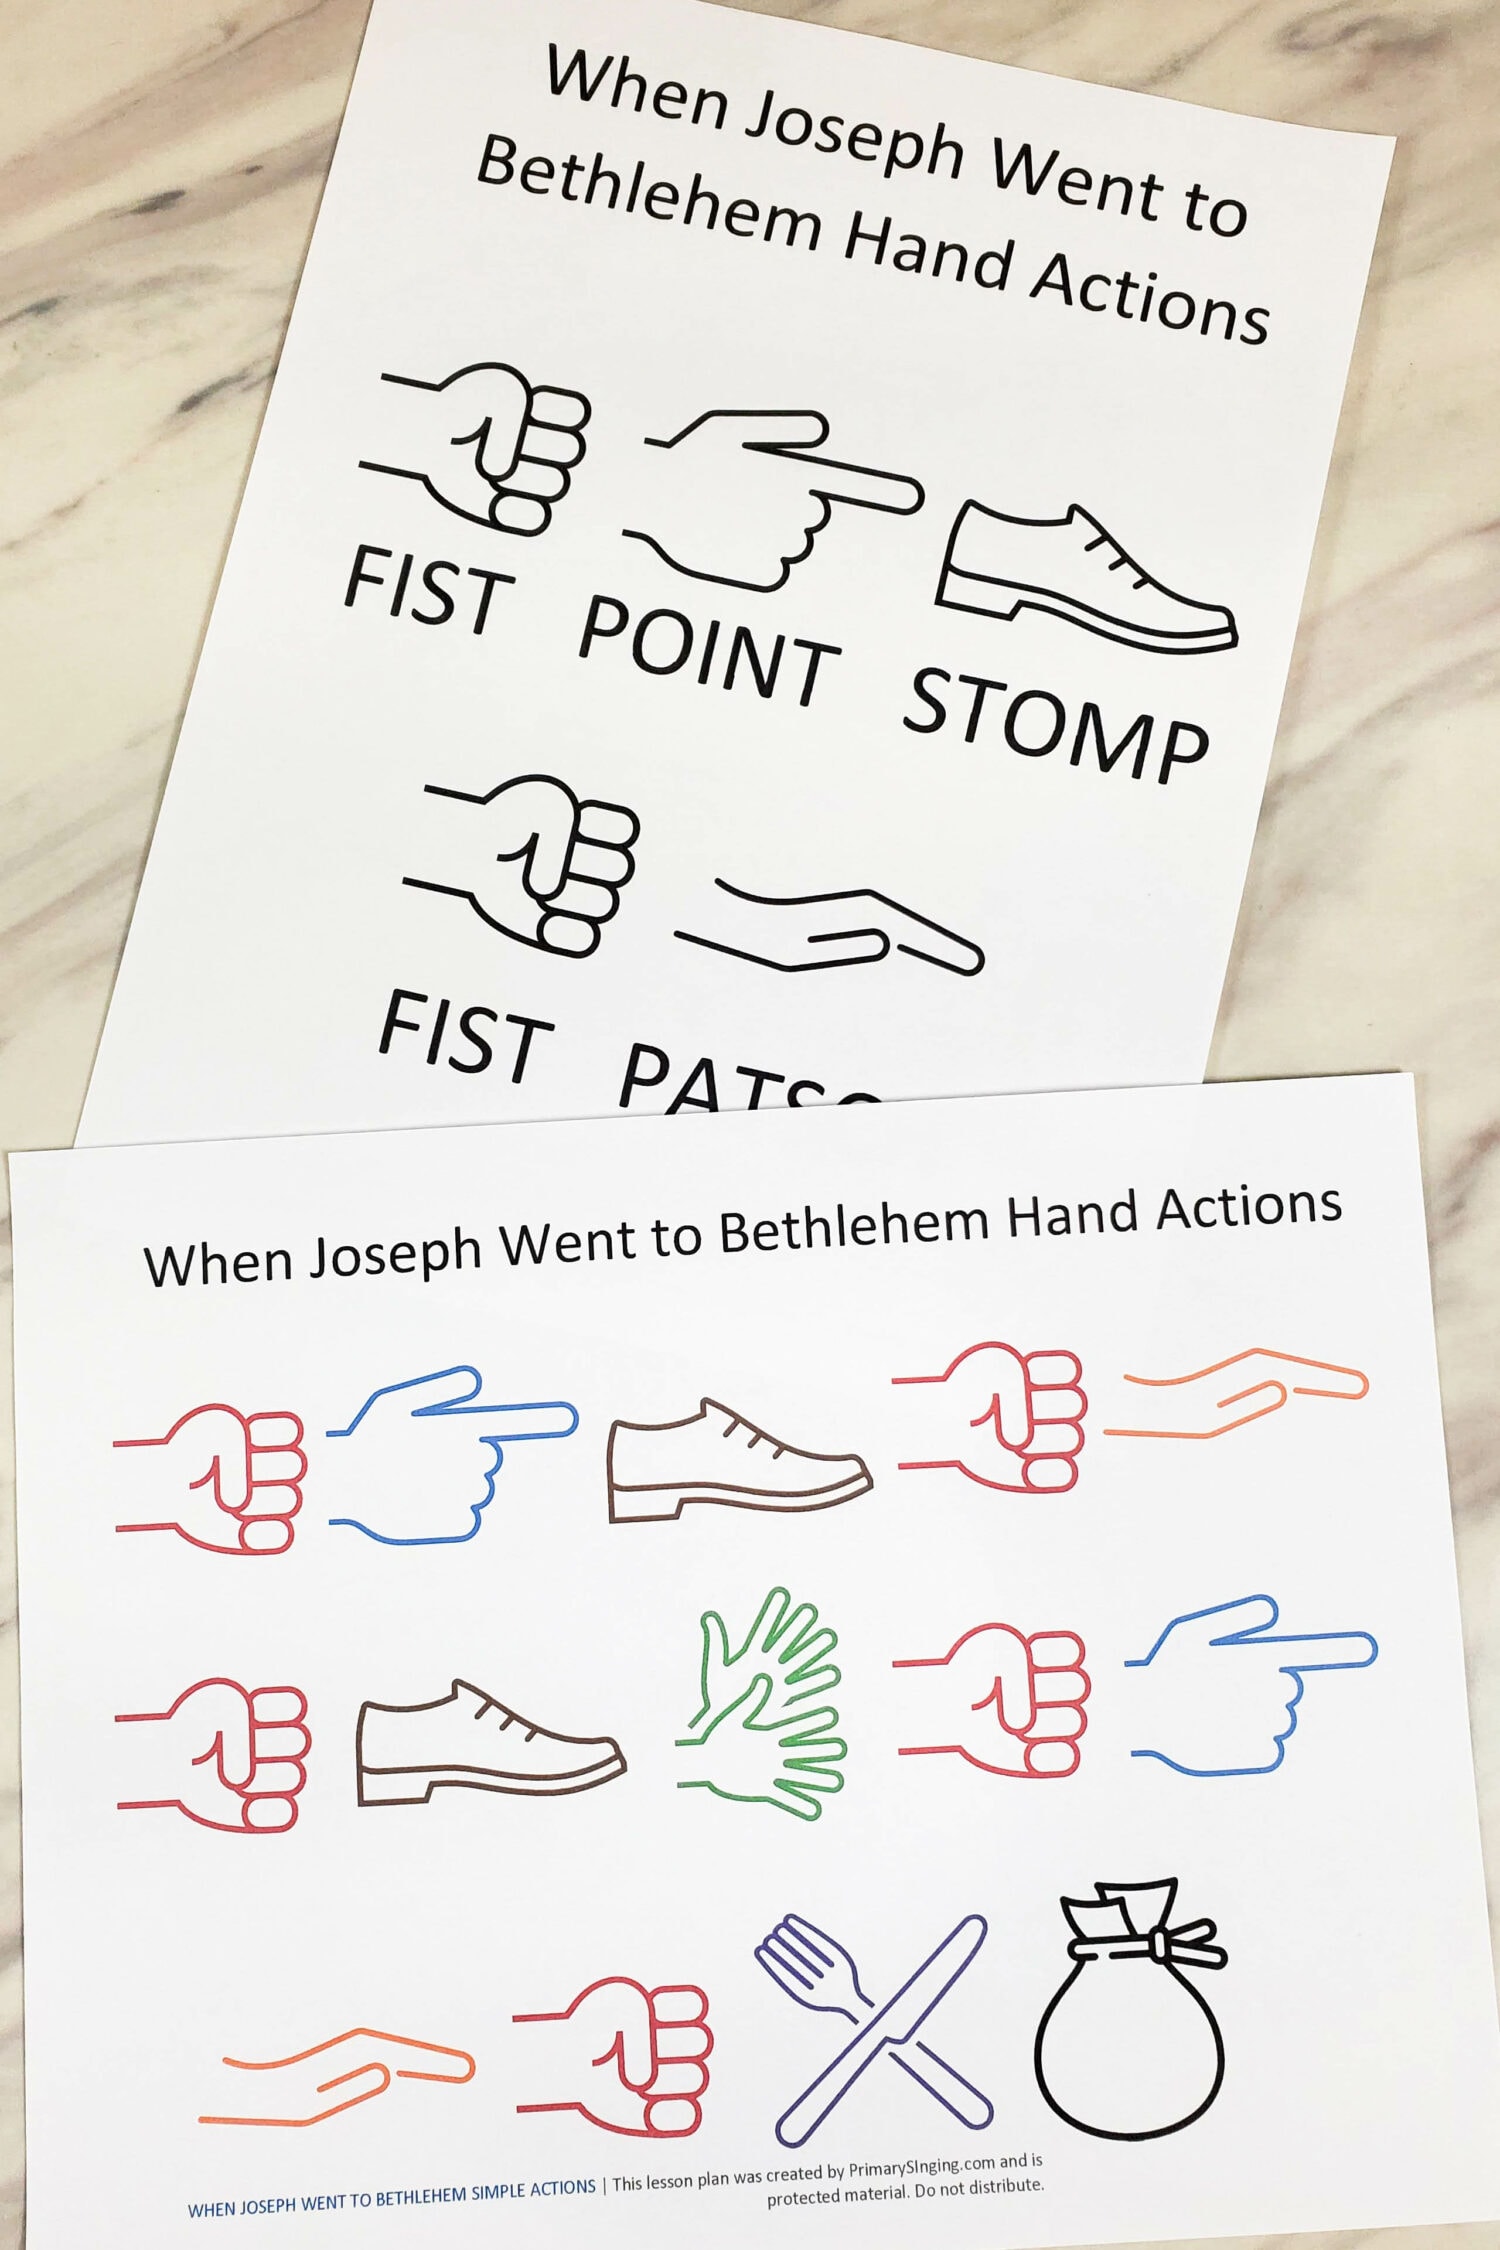 When Joseph Went to Bethlehem Simple Actions fun singing time idea - Use a series of actions and movements to go with the lyrics in this fun movement activity for LDS Primary music leaders teaching this song this Christmas!